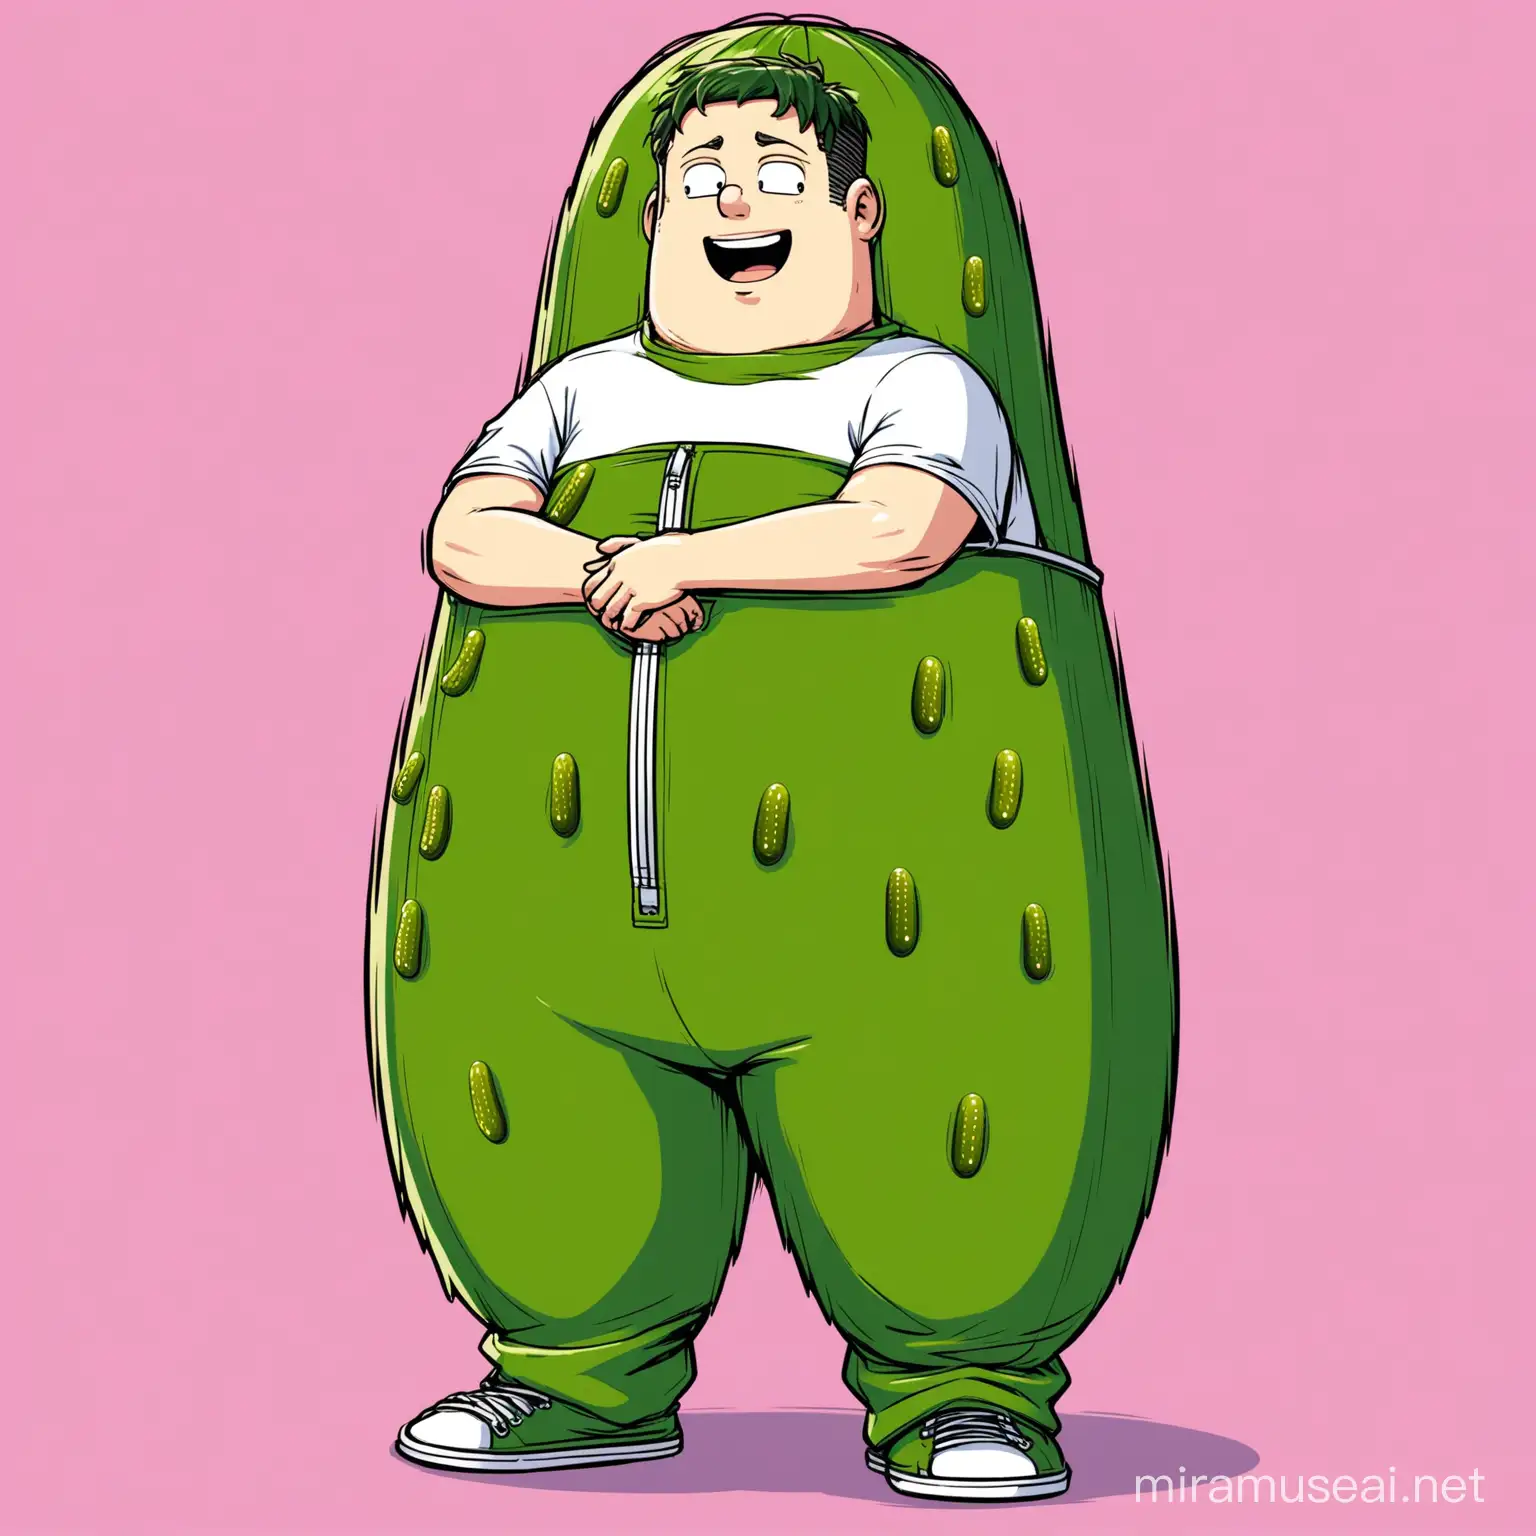 Whimsical Art HumanSized Pickle Named Carl in Retro Outfit